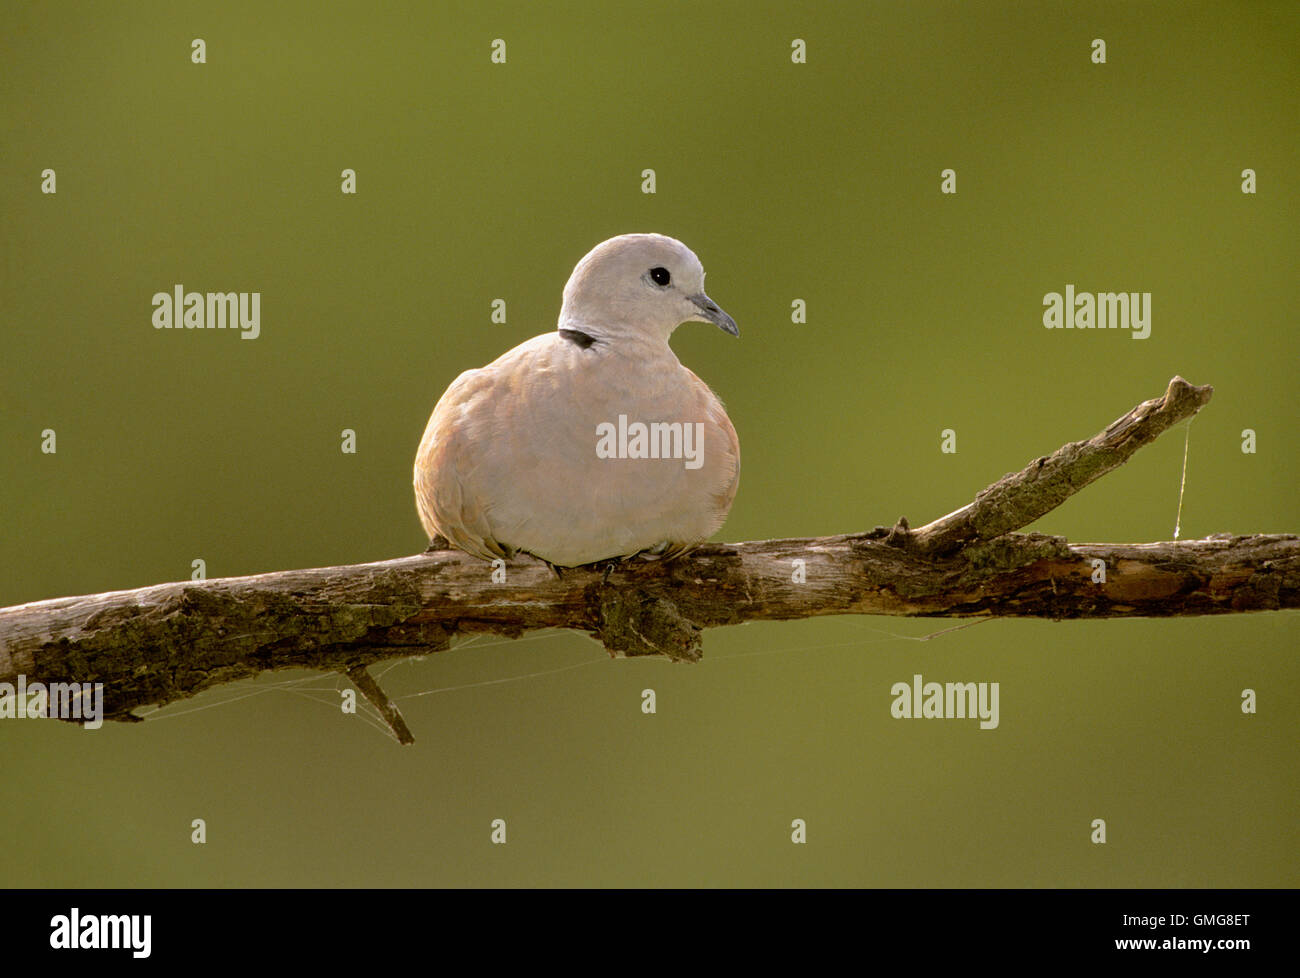 Collared Dove, Streptopelia decaocto, sitting on a branch, Keoladeo National Park, Bharatpur, India Stock Photo